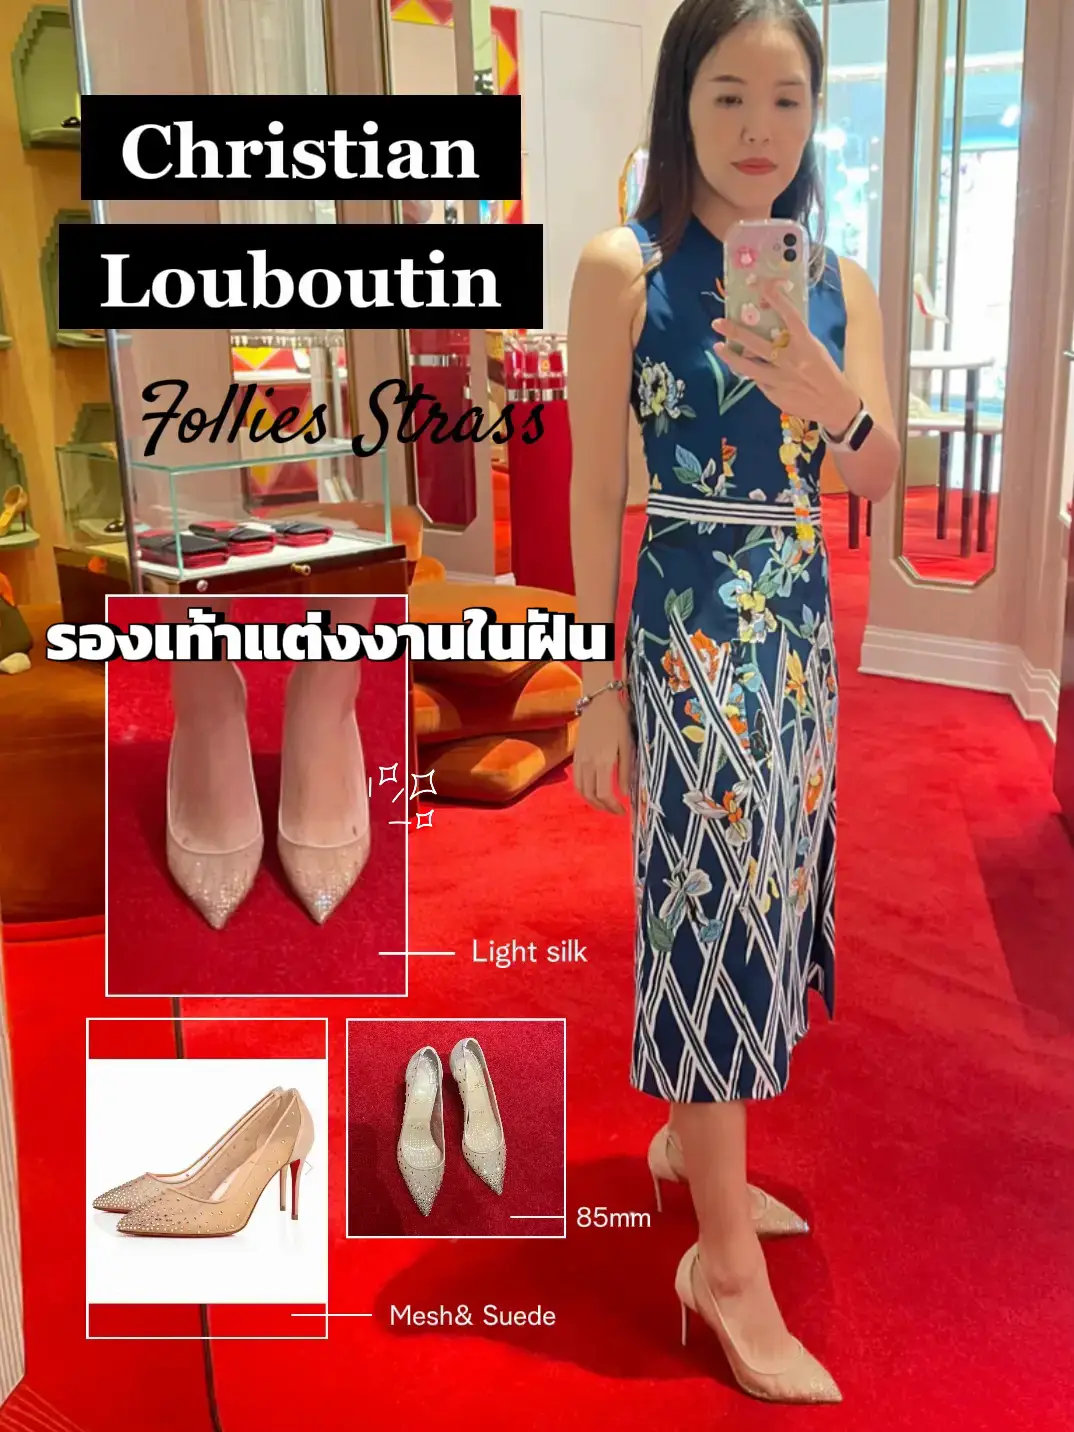 Christian Louboutin Opens Pop-Up Store in Indonesia